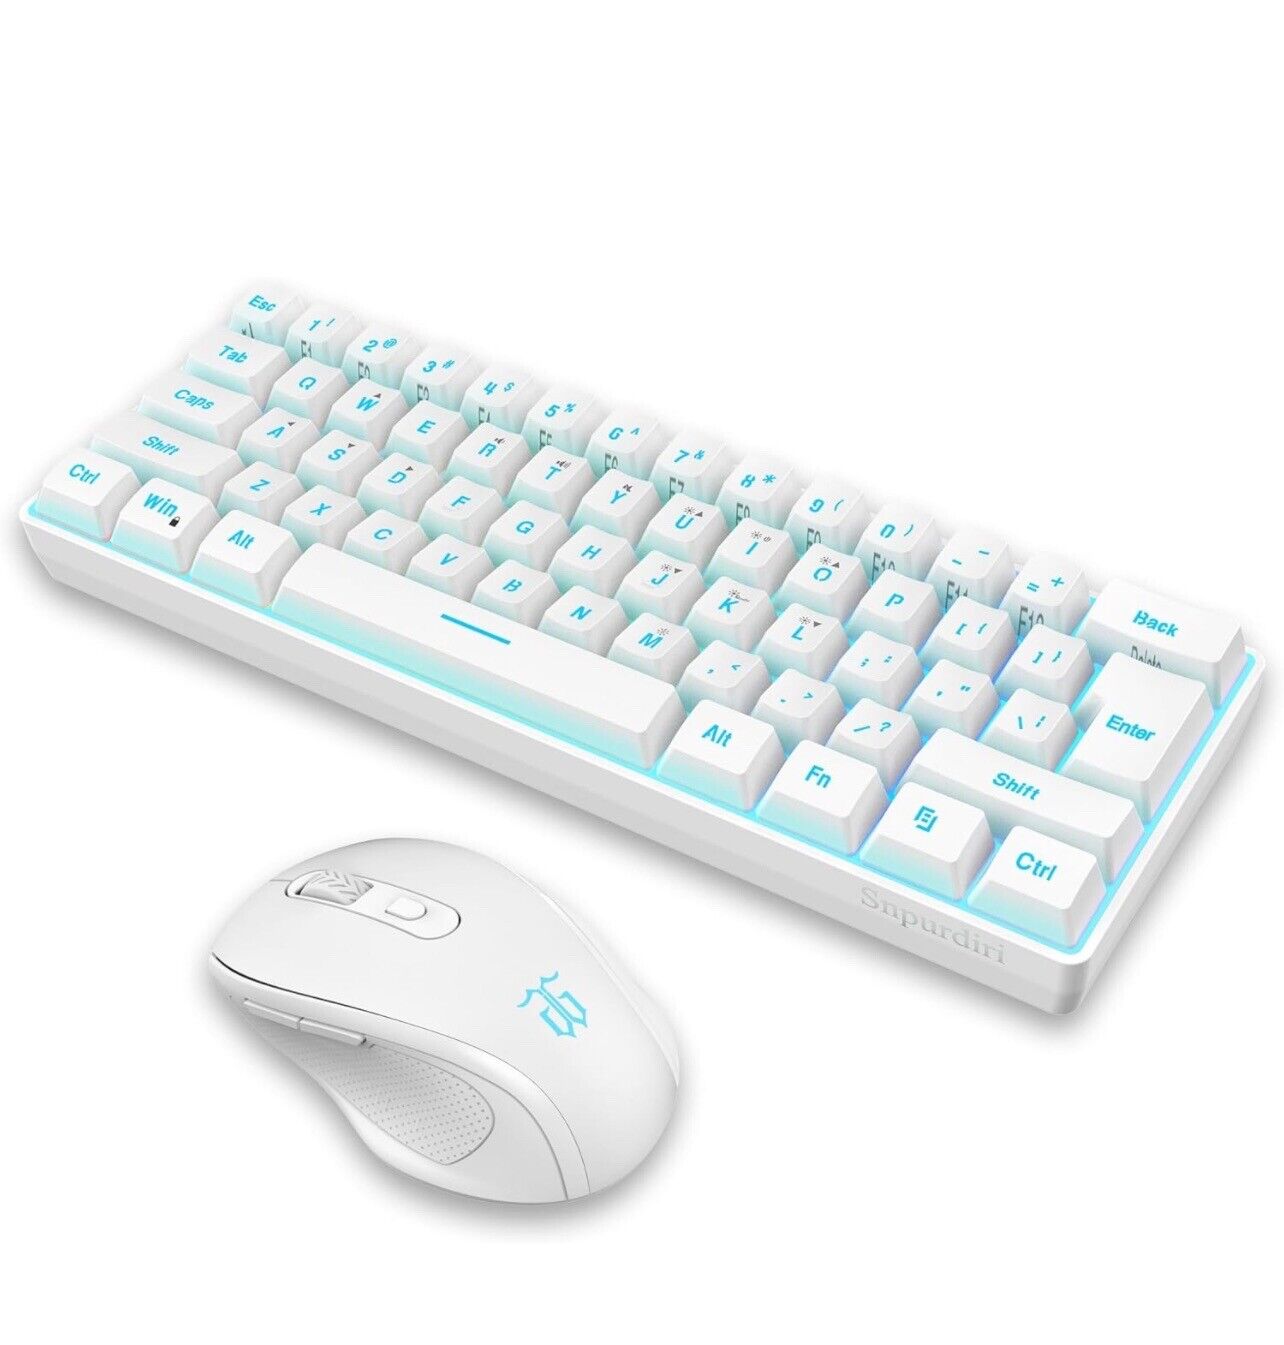 60% Wireless Gaming Keyboard 2.4G and Mouse Combo Merchanical Feel RGB Backlit